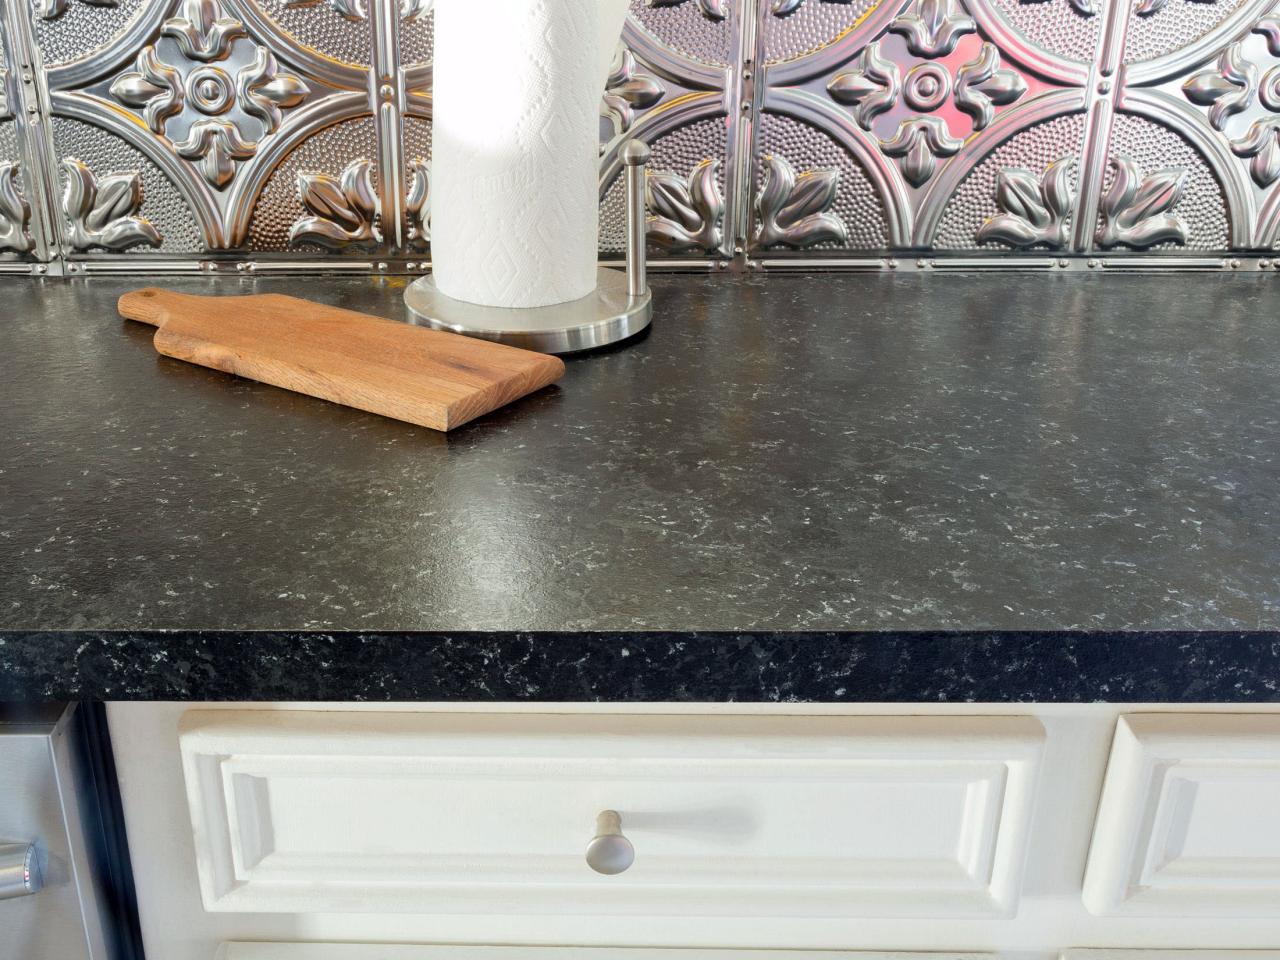 How To Paint A Laminate Countertop, Painting Over Laminate Countertops To Look Like Granite